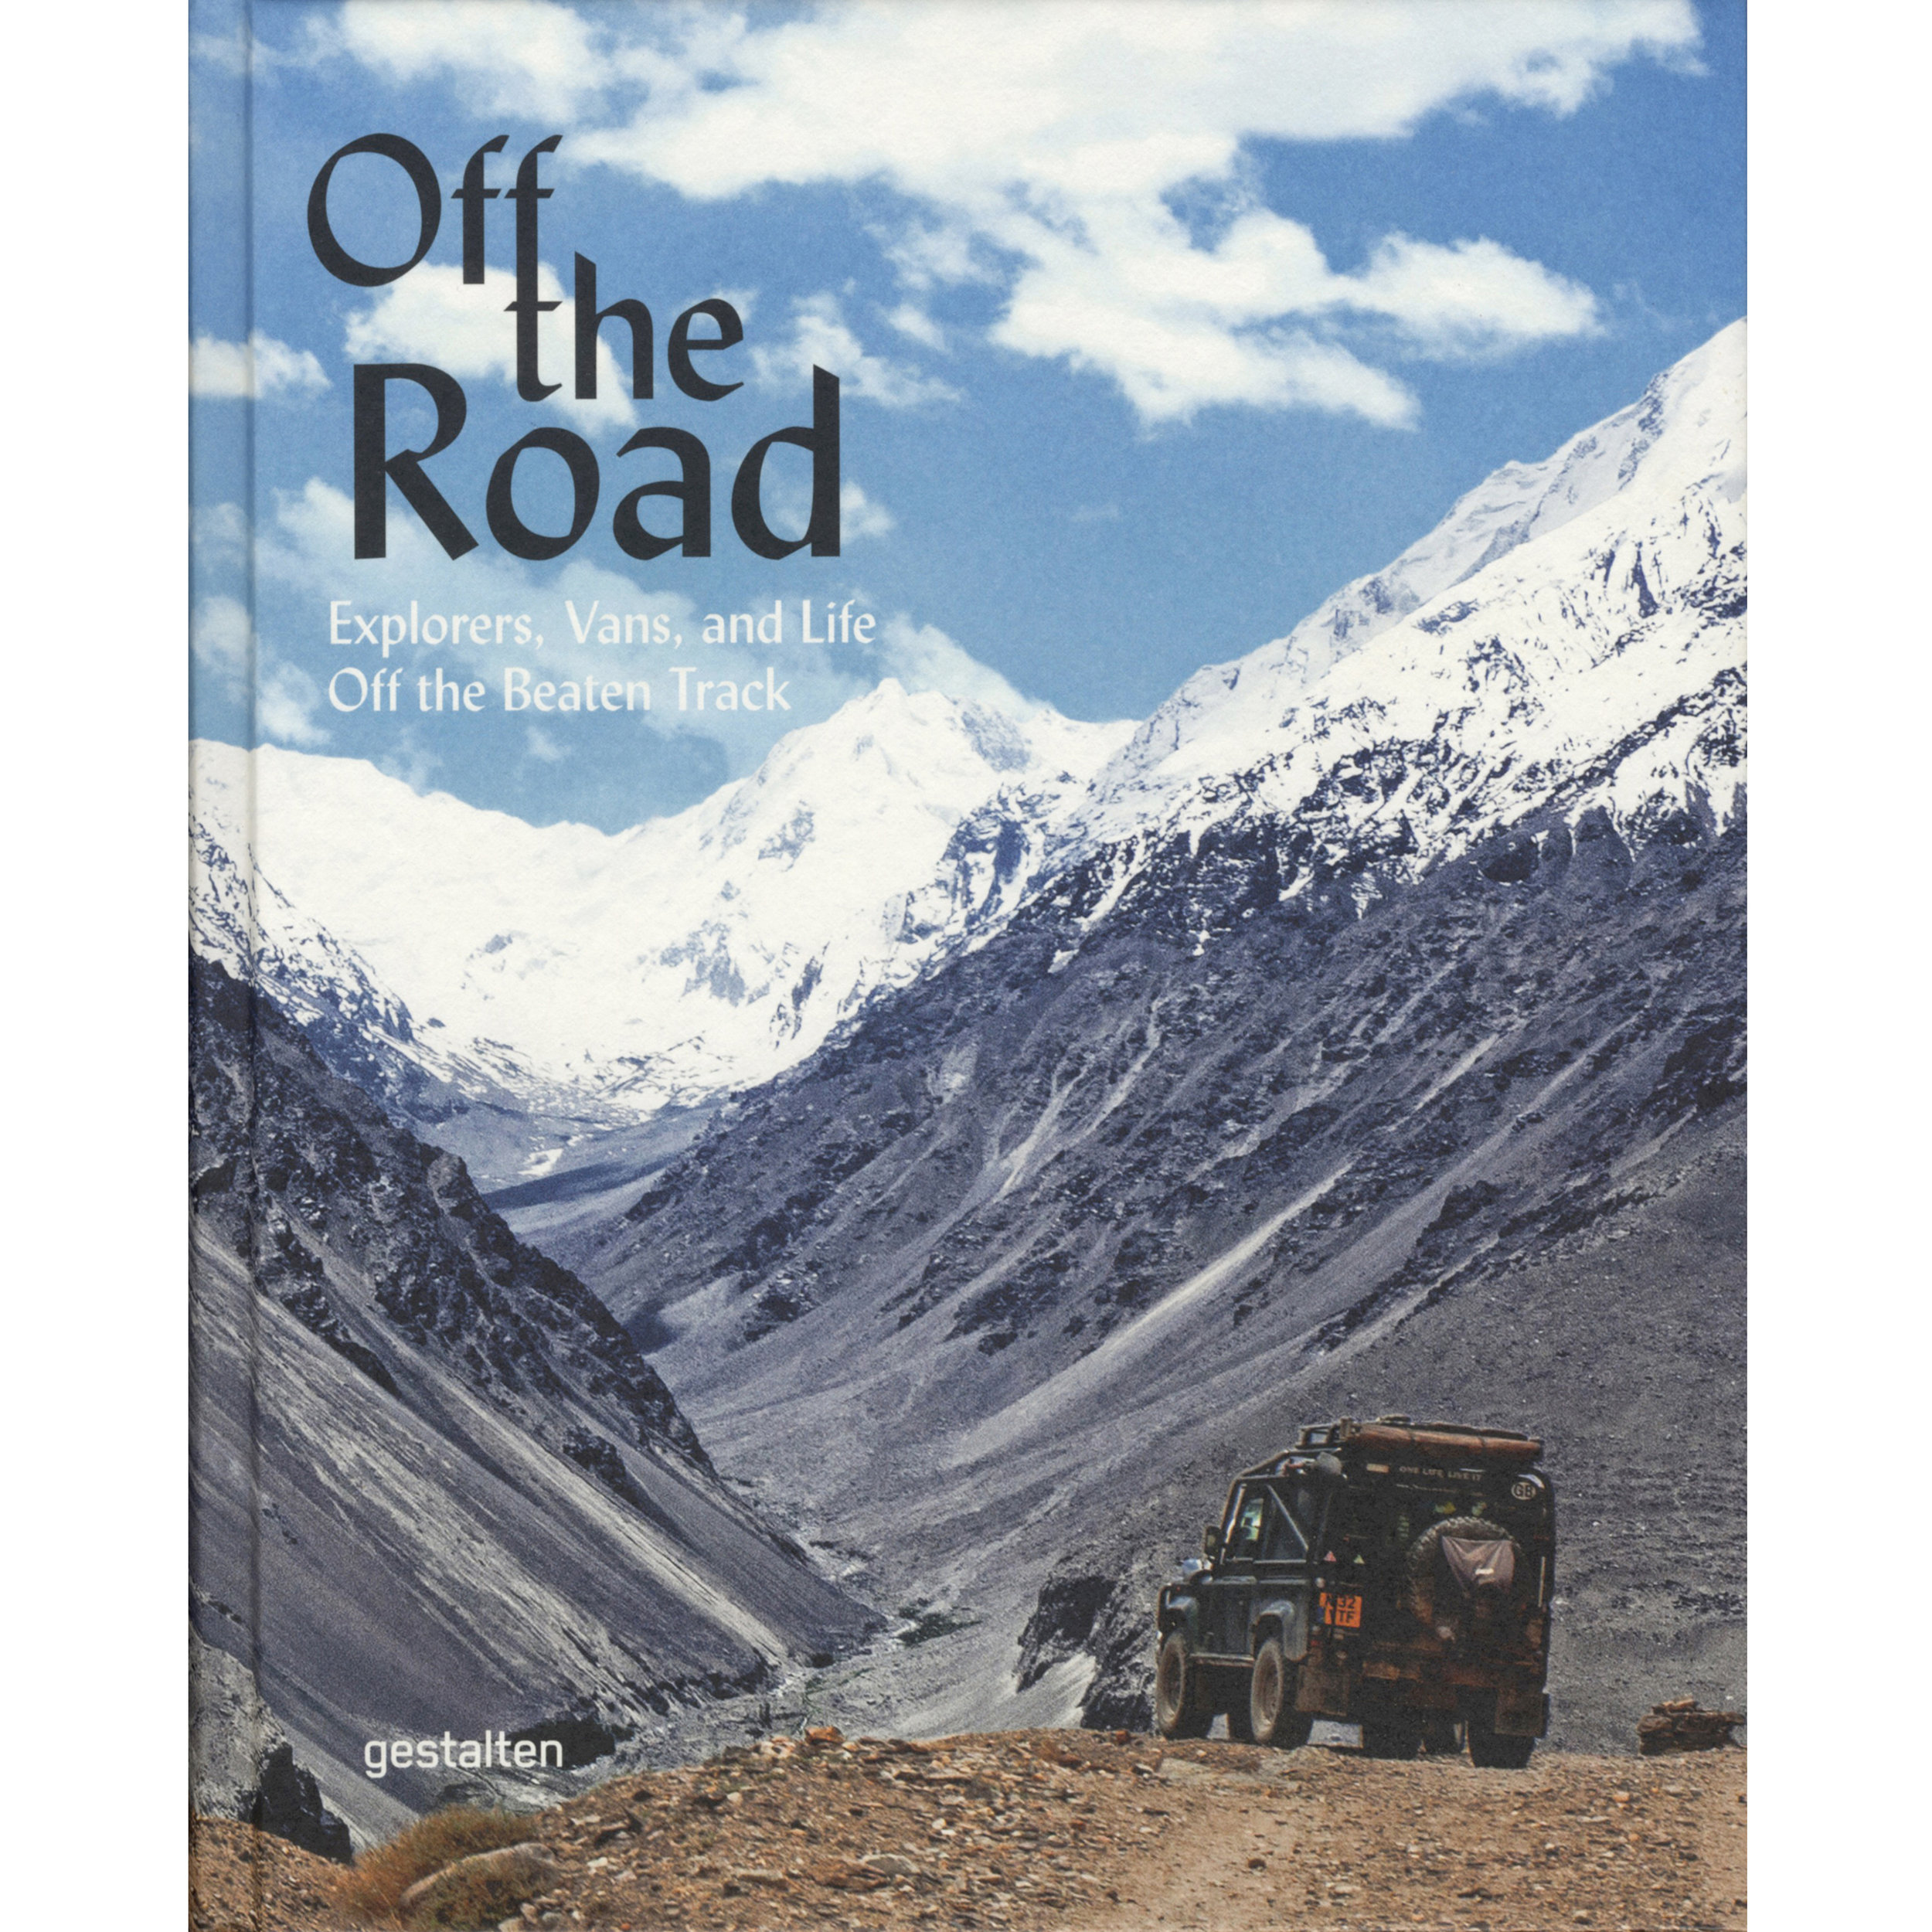 Off the Road published by Gestalten